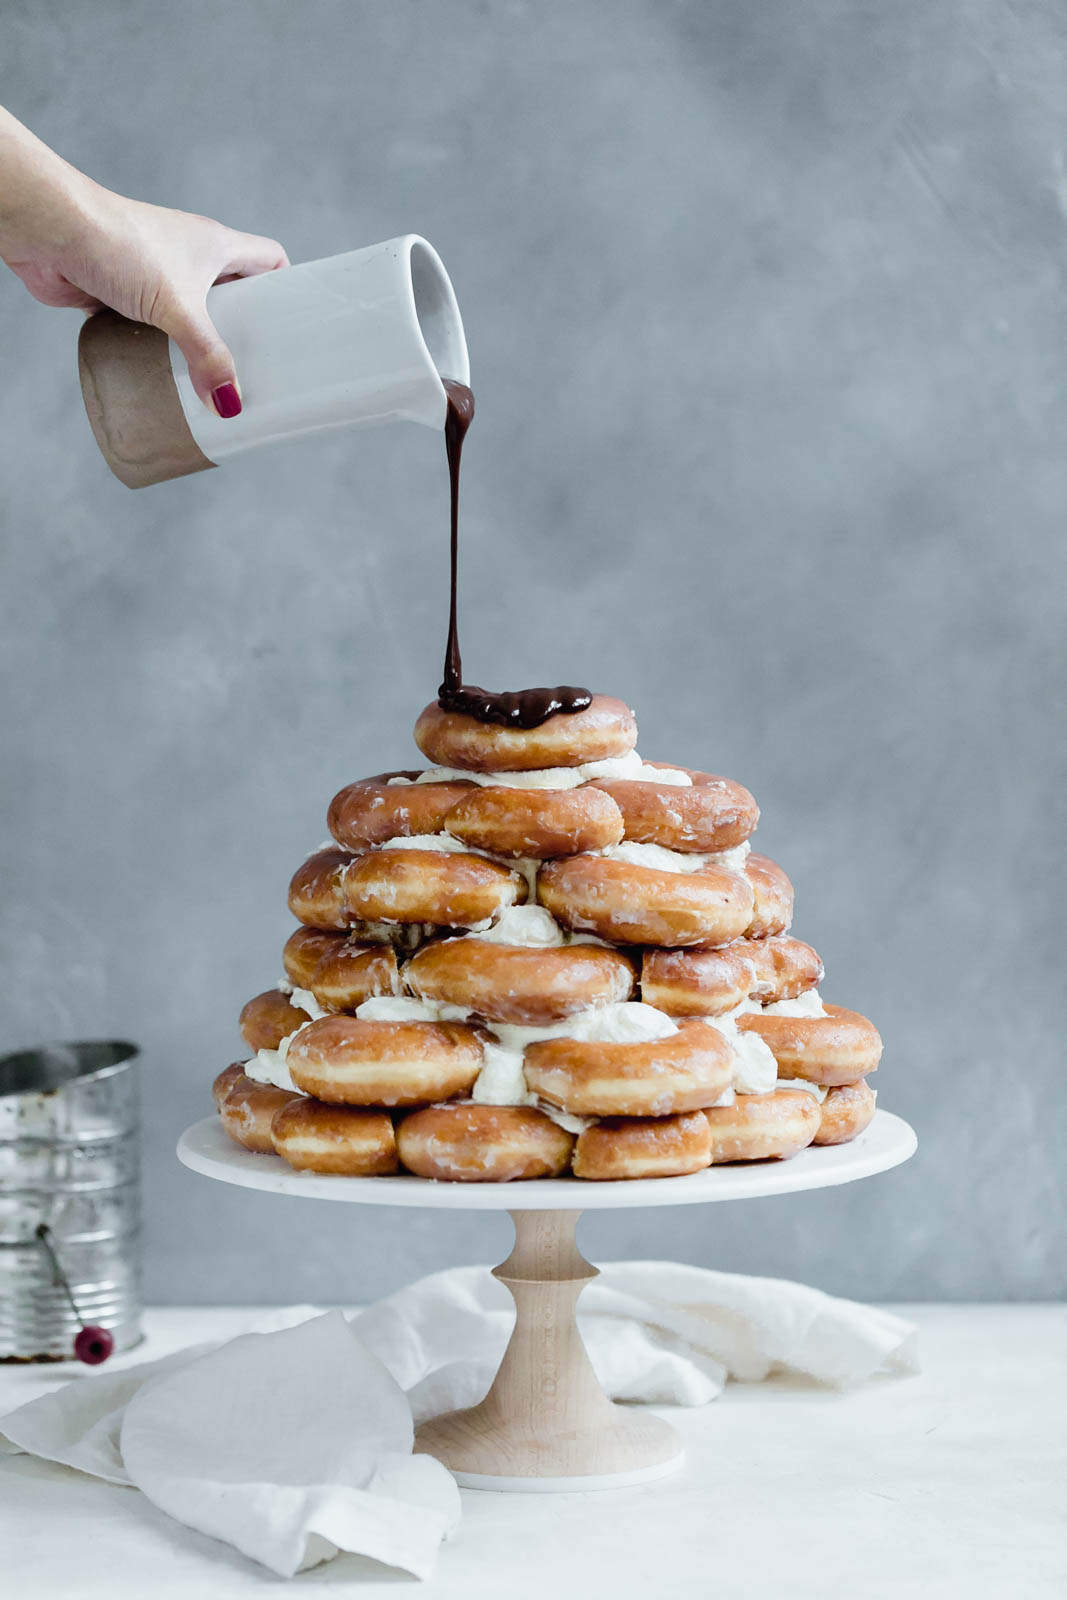 Tall Krispy Kreme donuts covered with chocolate coating